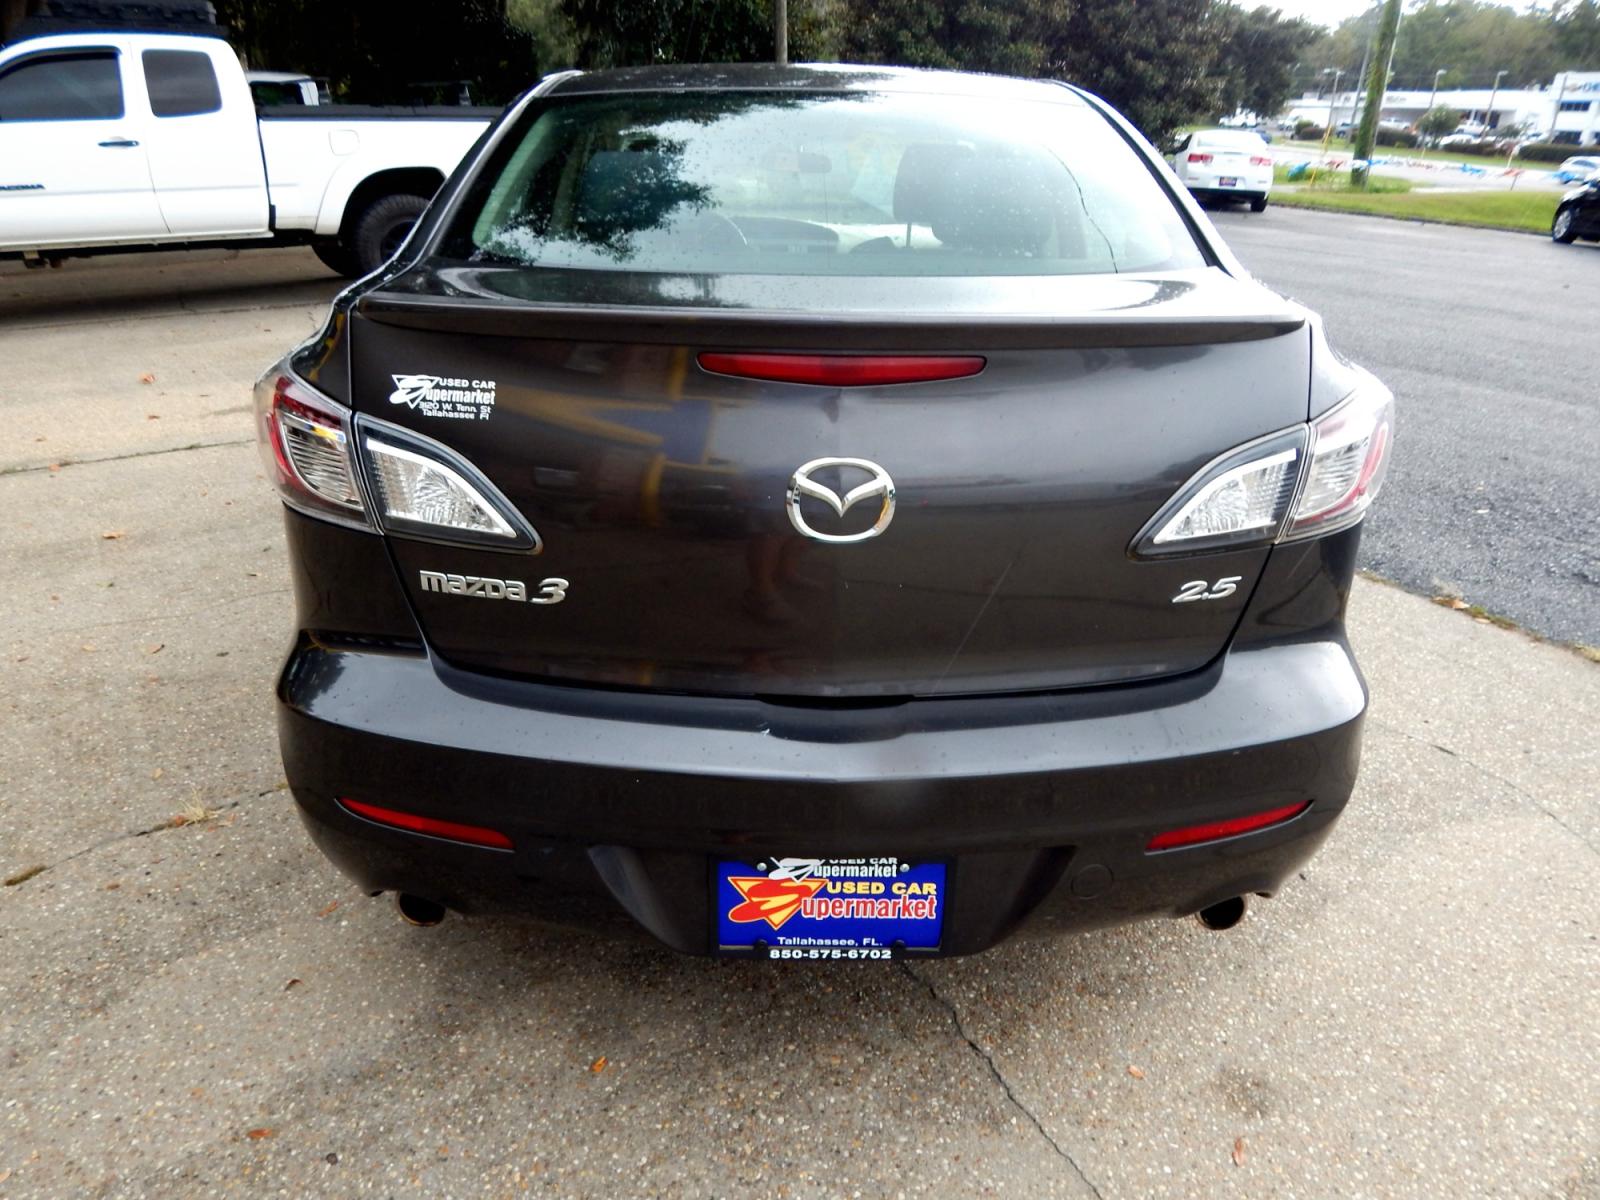 2010 Charcoal Metallic /Gray Mazda 3S sedan 3S with an 2.5l-4 cyl. engine, Automatic transmission, located at 3120 W Tennessee St, Tallahassee, FL, 32304-1002, (850) 575-6702, 30.458841, -84.349648 - Used Car Supermarket is proud to present you with this loaded immaculate 2010 Mazda 3S sedan with low miles. Used Car Supermarket prides itself in offering you the finest pre-owned vehicle in Tallahassee. Used Car Supermarket has been locally family owned and operated for over 48 years. Our 3S sedan - Photo #4